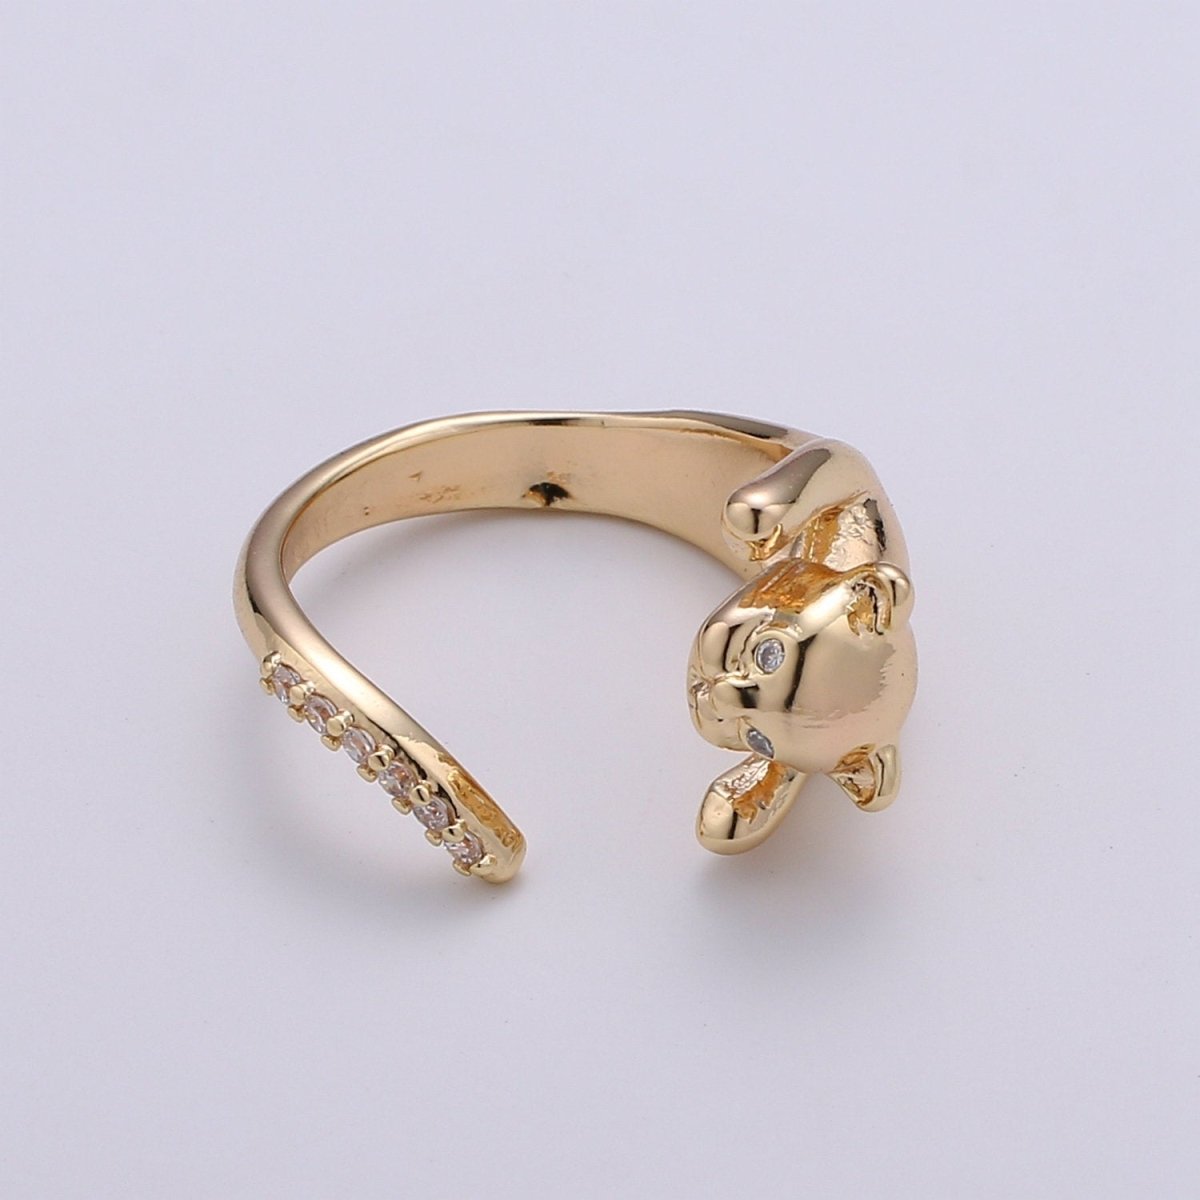 Gold Vermeil Ring Dainty Gold Cat Ring. Adjustable Ring Open Ring Gift For Birthday, Christmas, Gifts For Her. Cat Lover Jewelry Gift Idea R-061 - DLUXCA